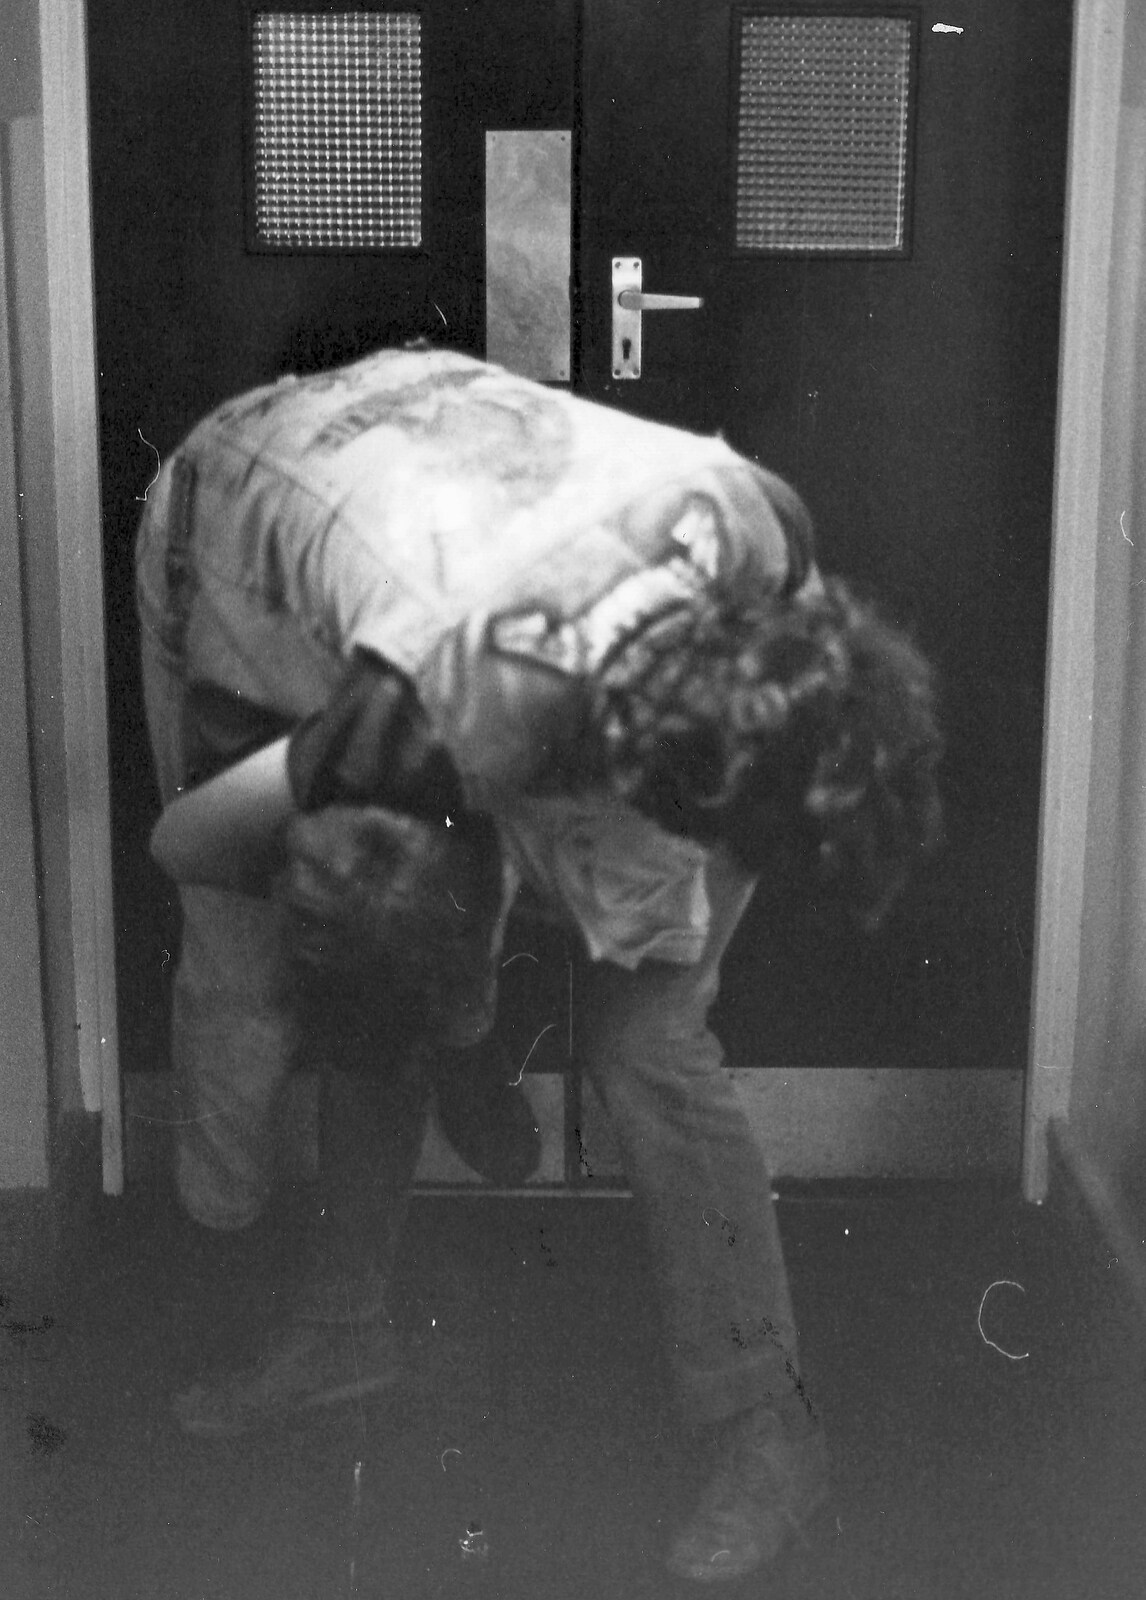 Boris and Andrew mess around again from Learning Black-and-White Photography, Brockenhurst College, Hampshire - 10th March 1985